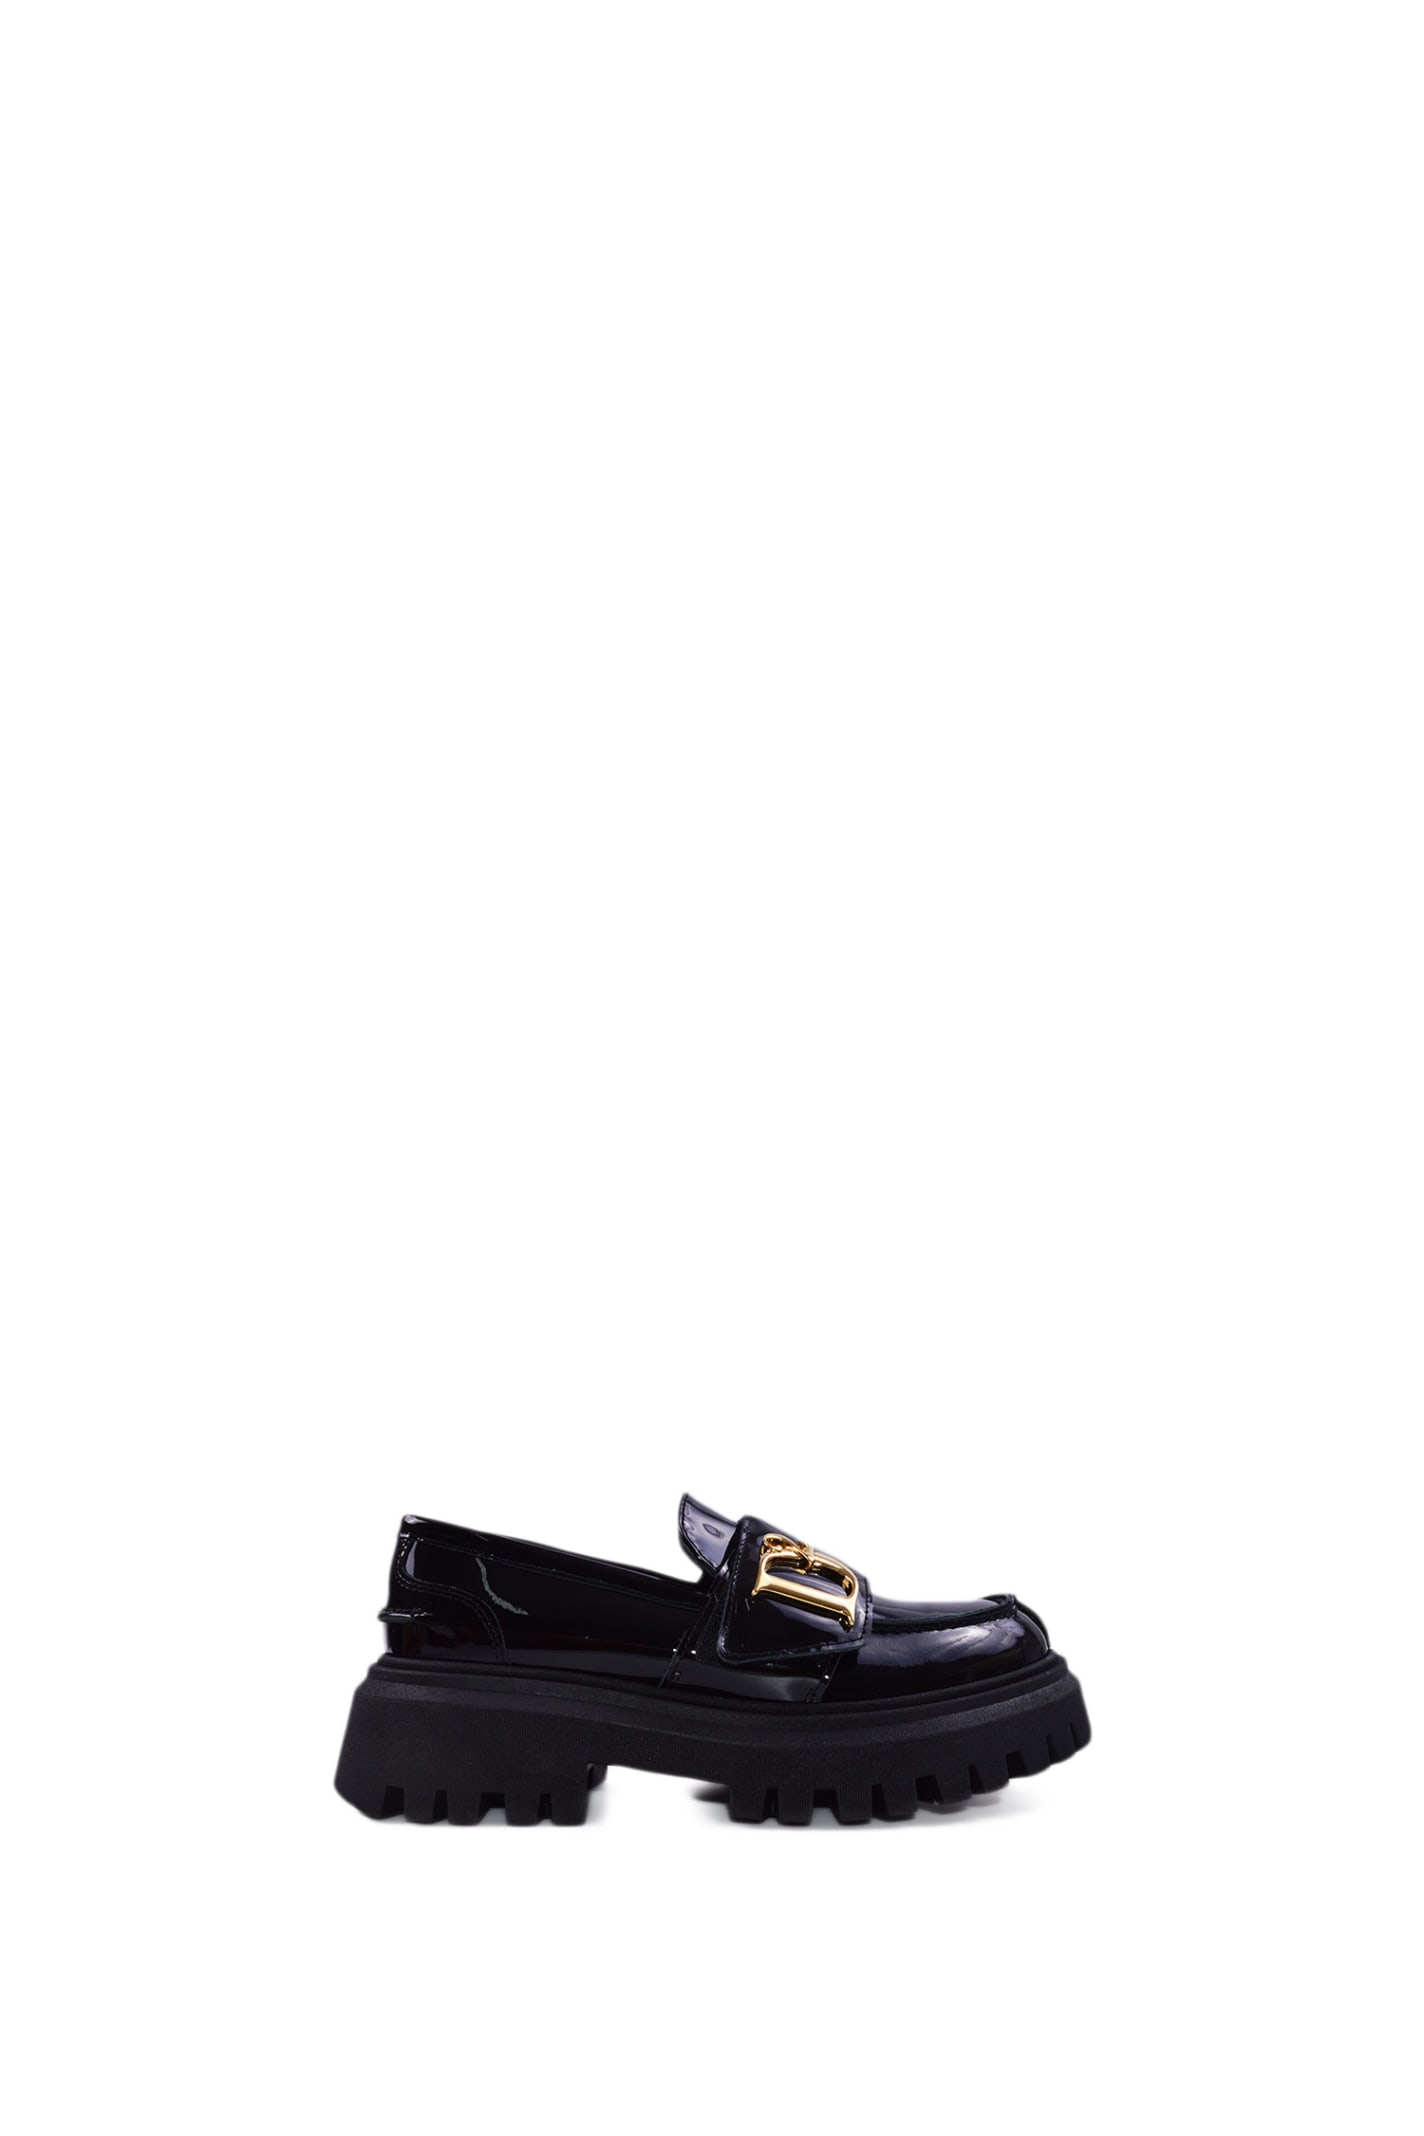 DSQUARED2 LEATHER LOAFERS